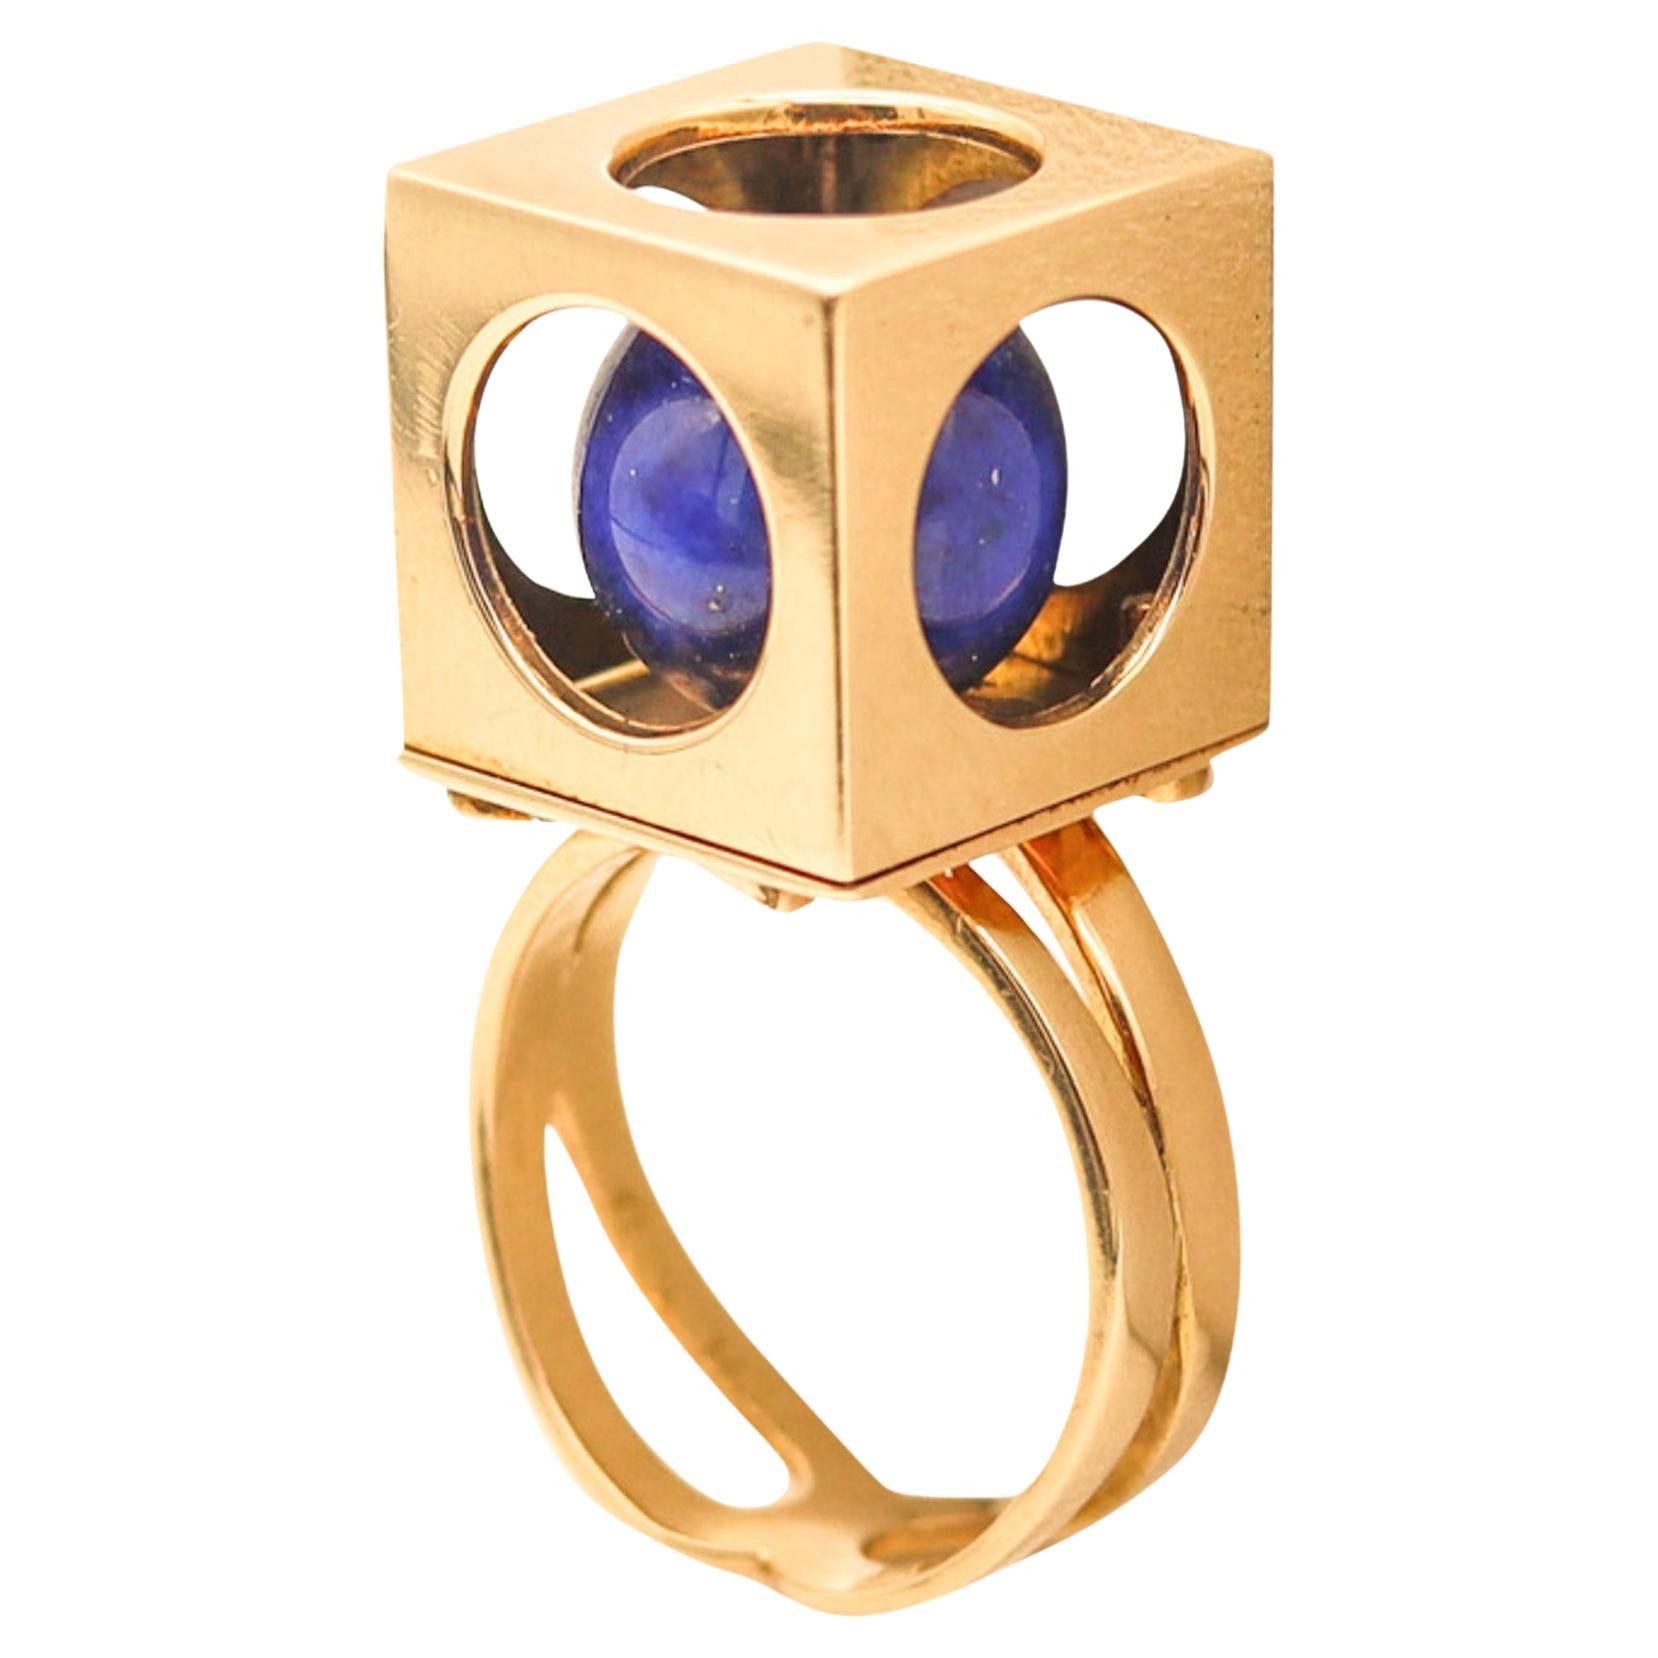 European Modernist 1970 Sculptural Ring In 14Kt Yellow Gold With Lapis Lazuli For Sale